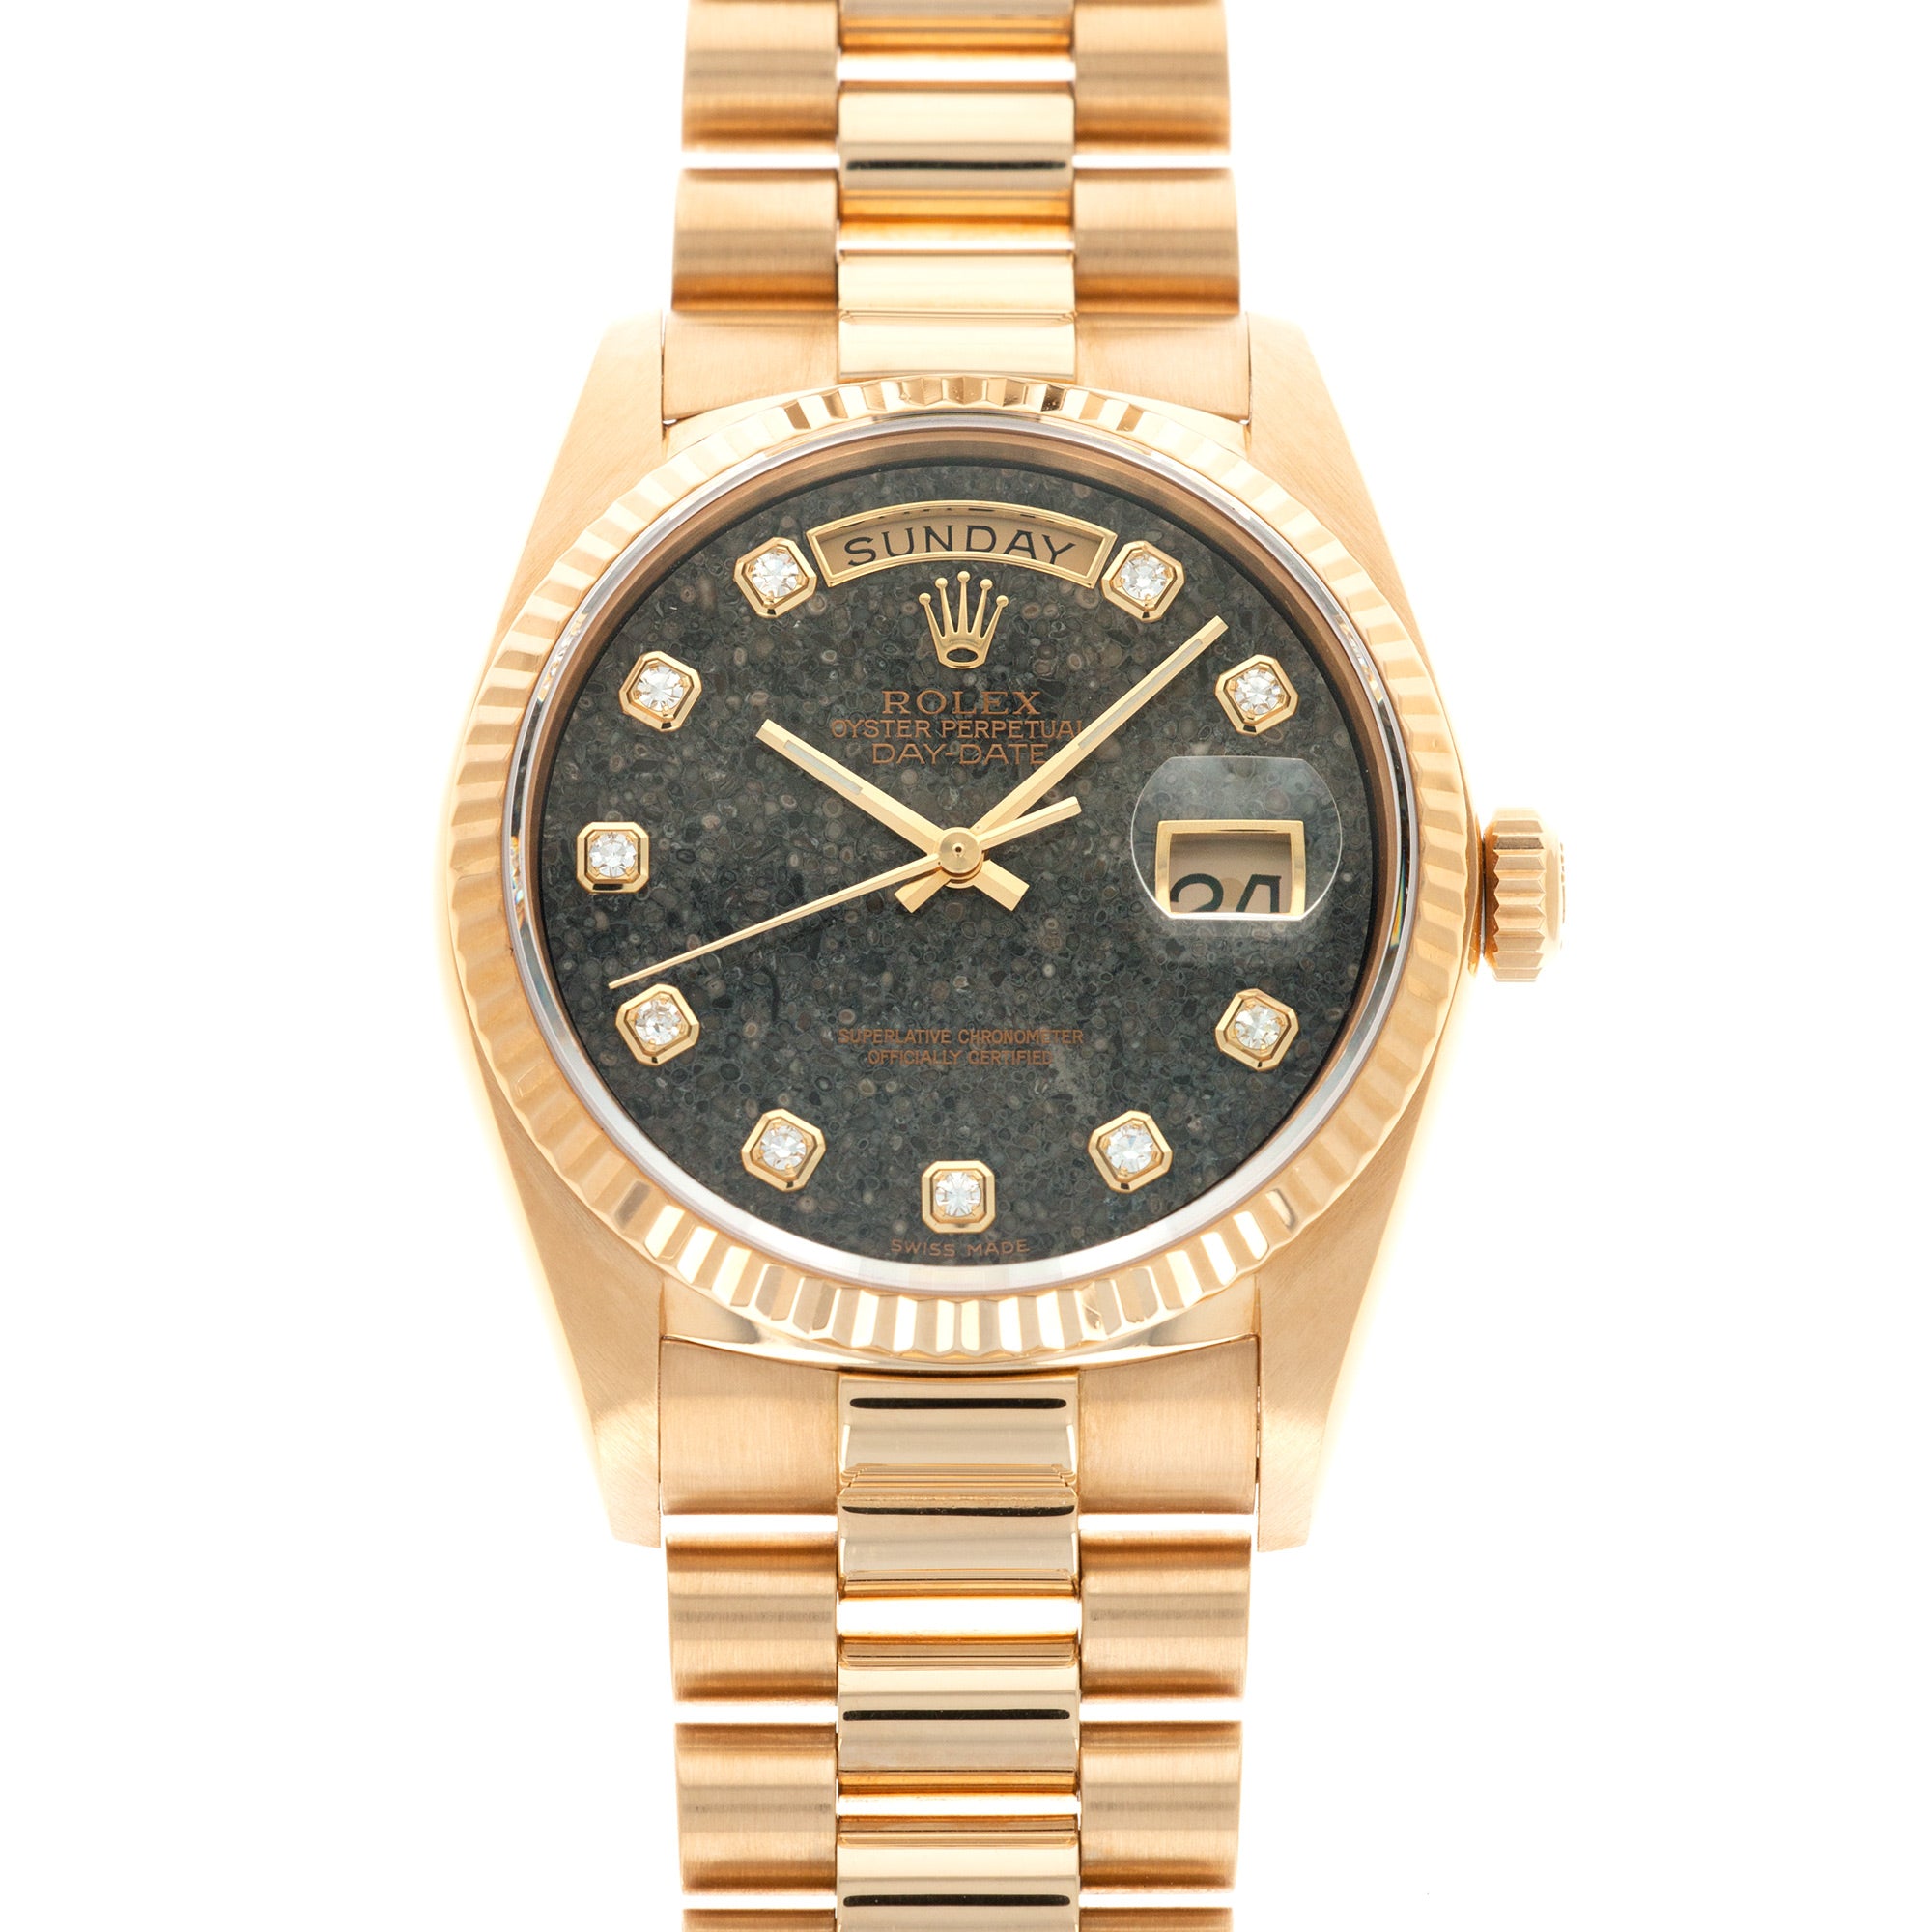 Rolex - Rolex Yellow Gold Jurassic Park Fossil Dial Day-Date Ref. 18038 - The Keystone Watches